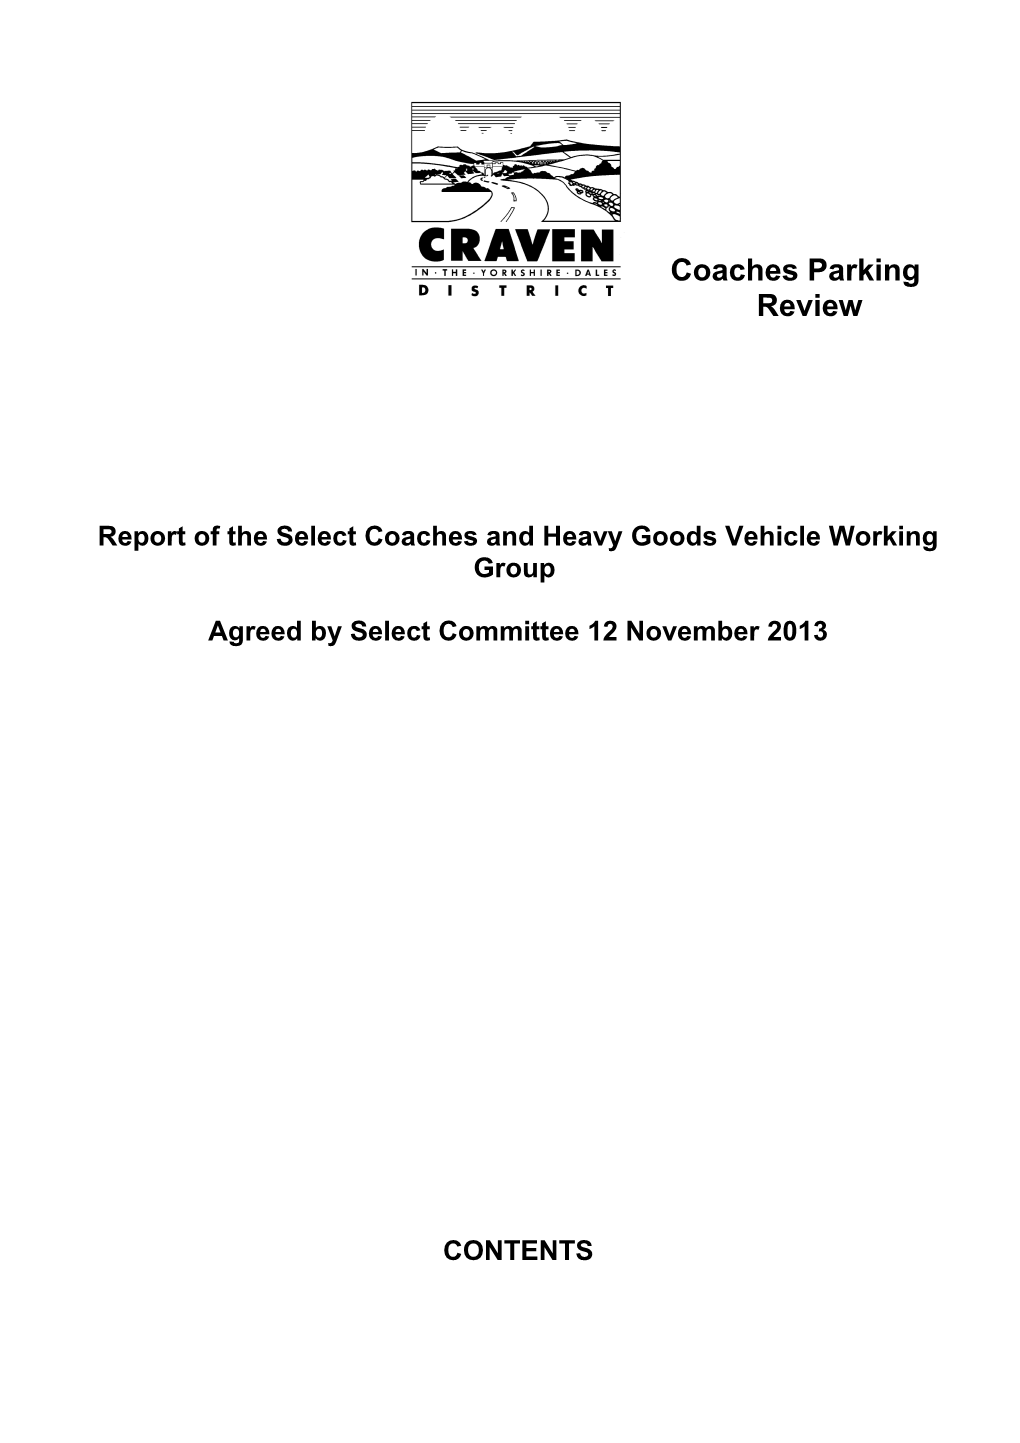 Report of the Select Coaches and Heavy Goods Vehicle Working Group